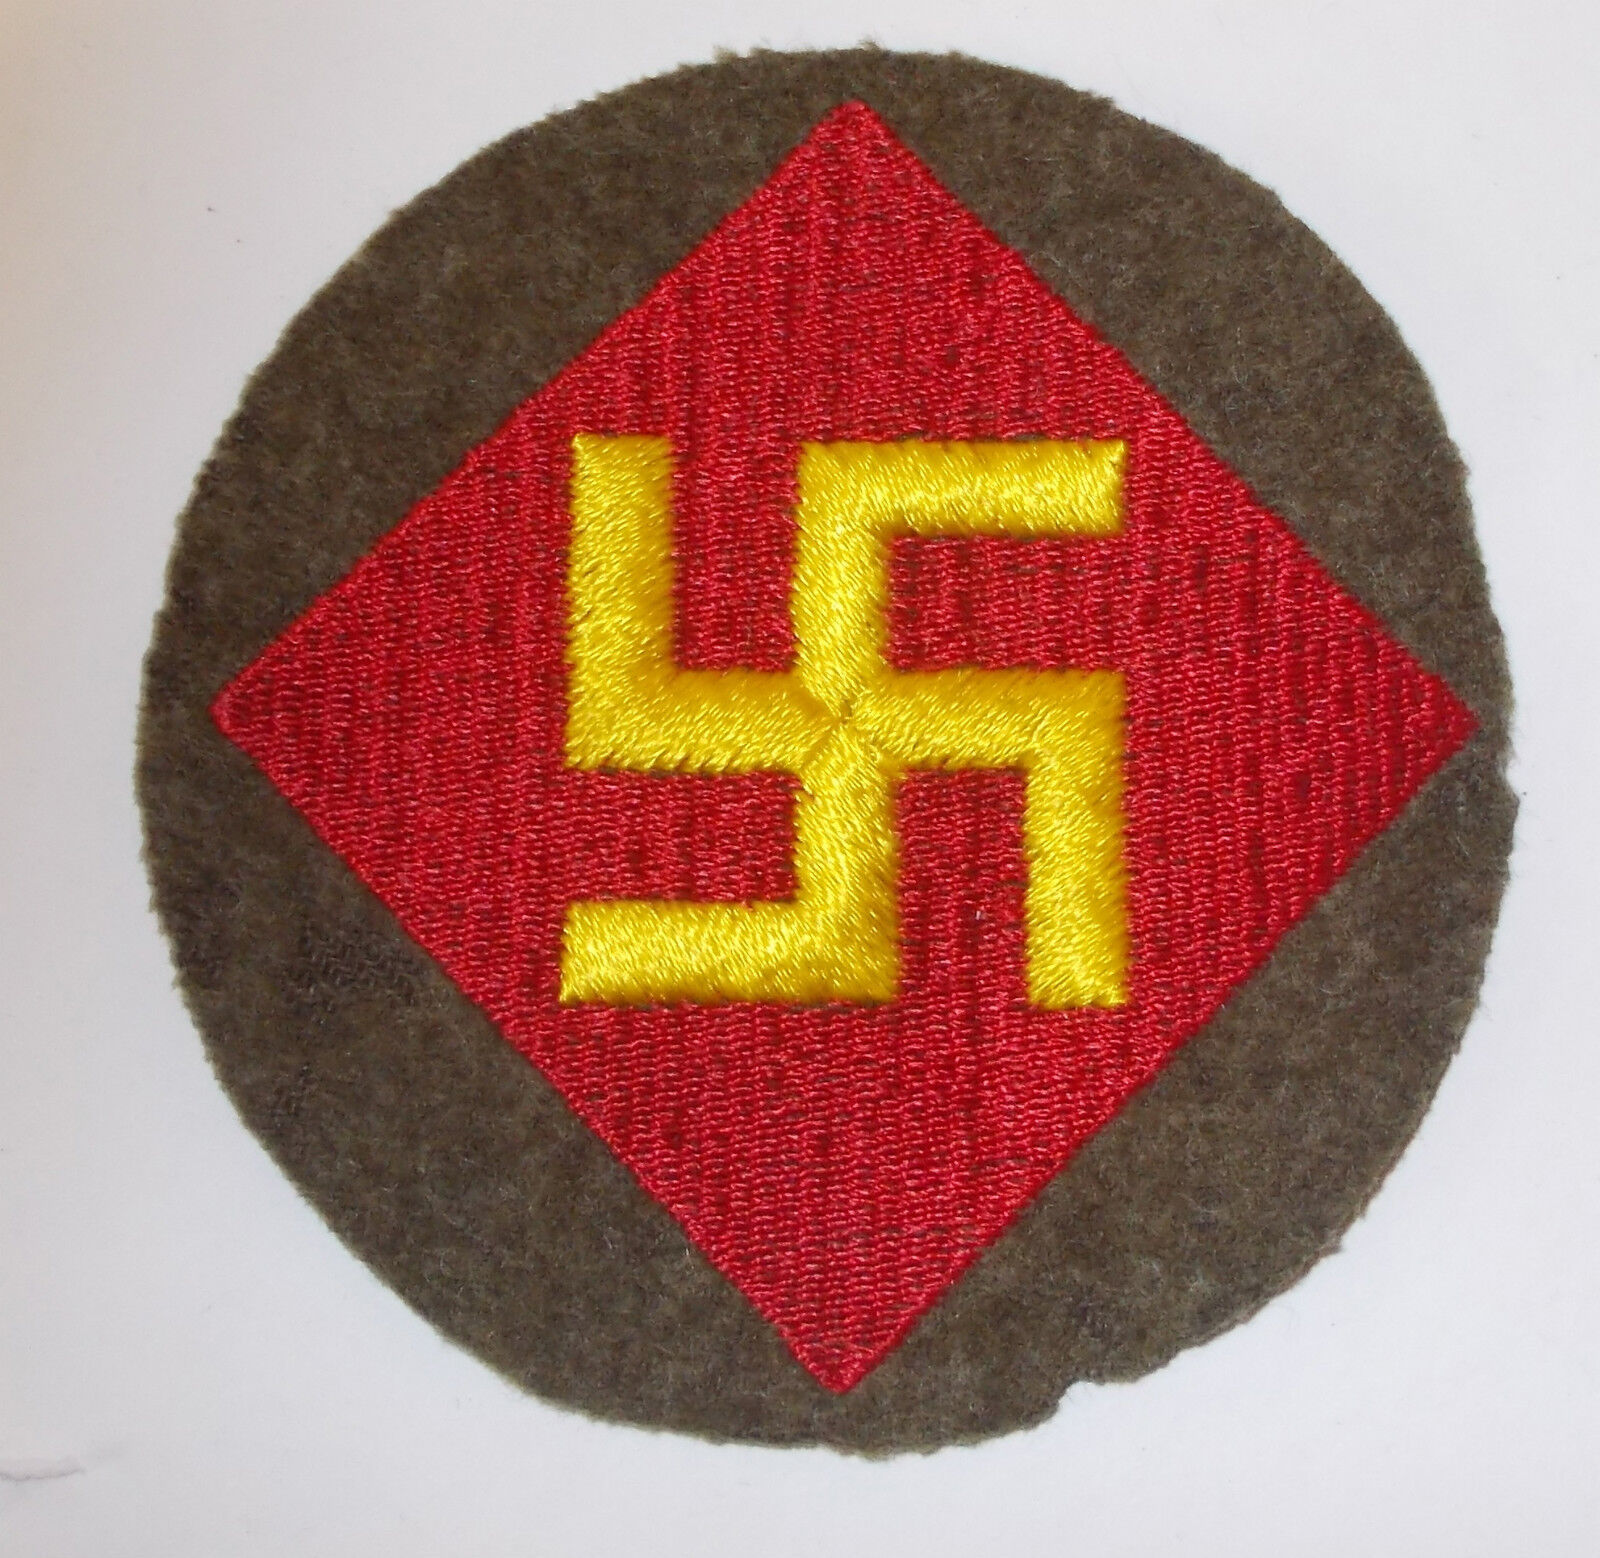 Original US Army WWII 45th Infantry Division Shoulder Patch Wool Pre-War Rare